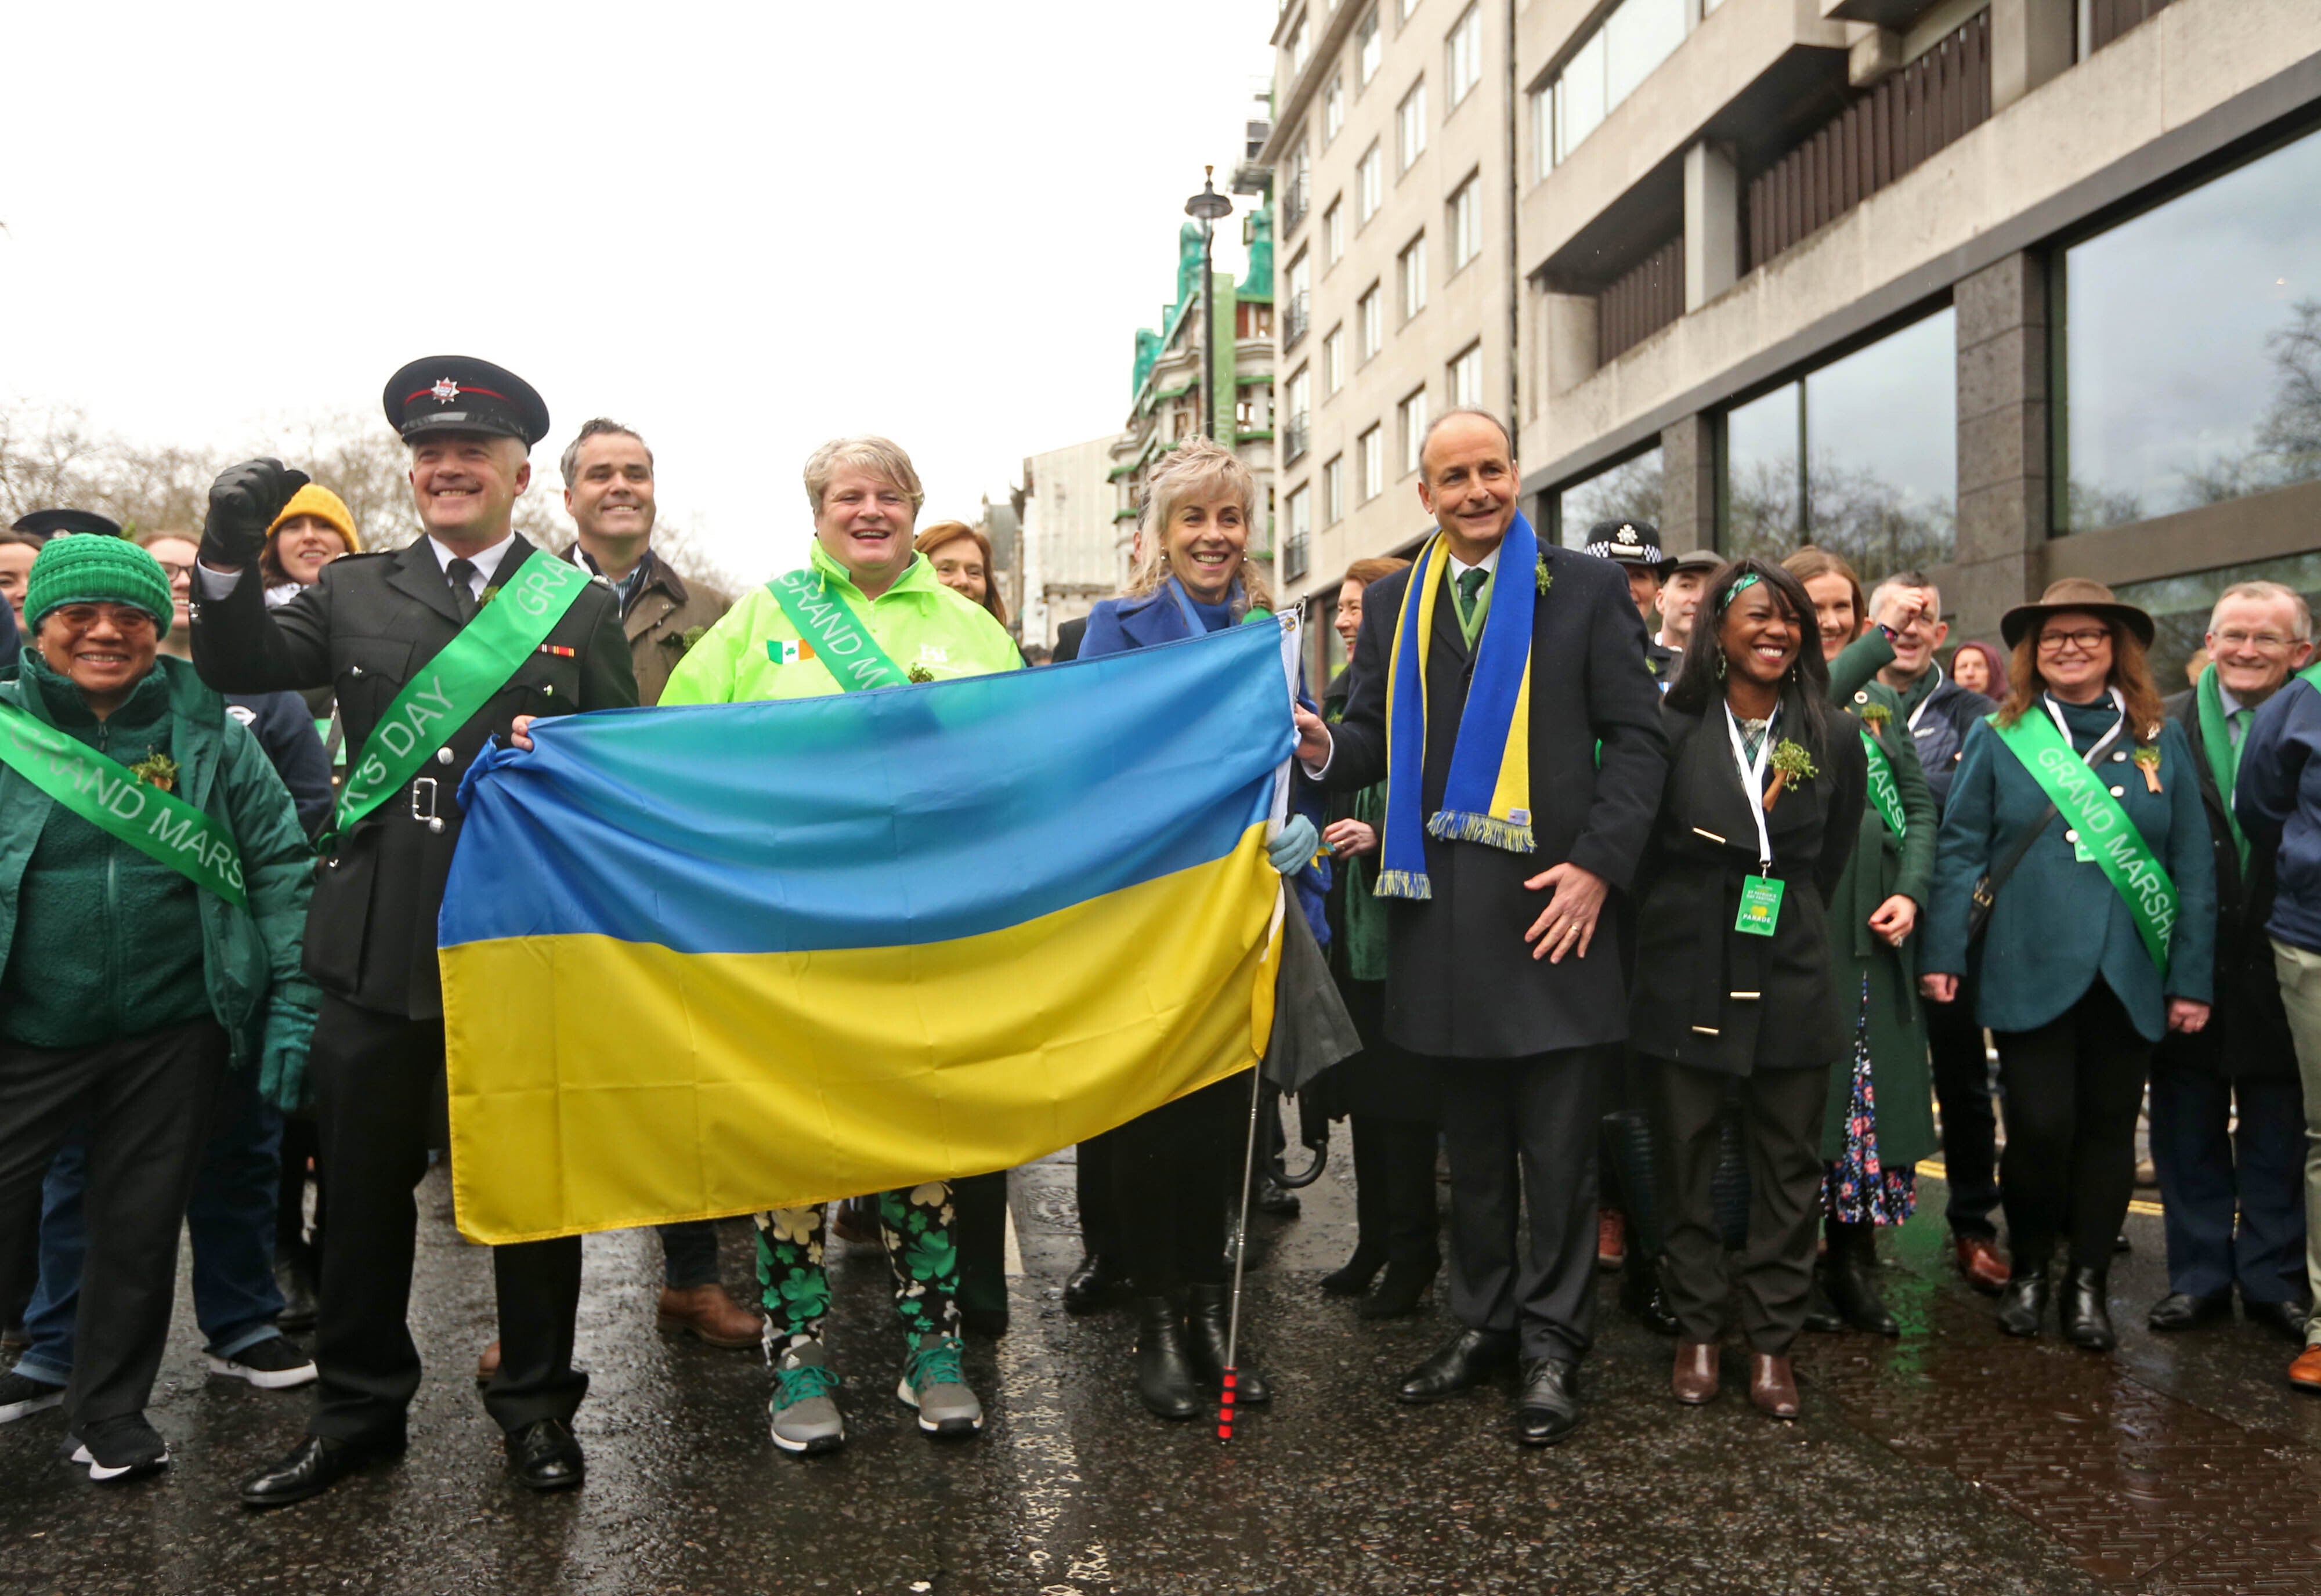 Taoiseach Micheal Martin (centre right) with the grand marshals including Natalia Lesyuk during the St Patrick’s Day parade in London (James Manning/PA)